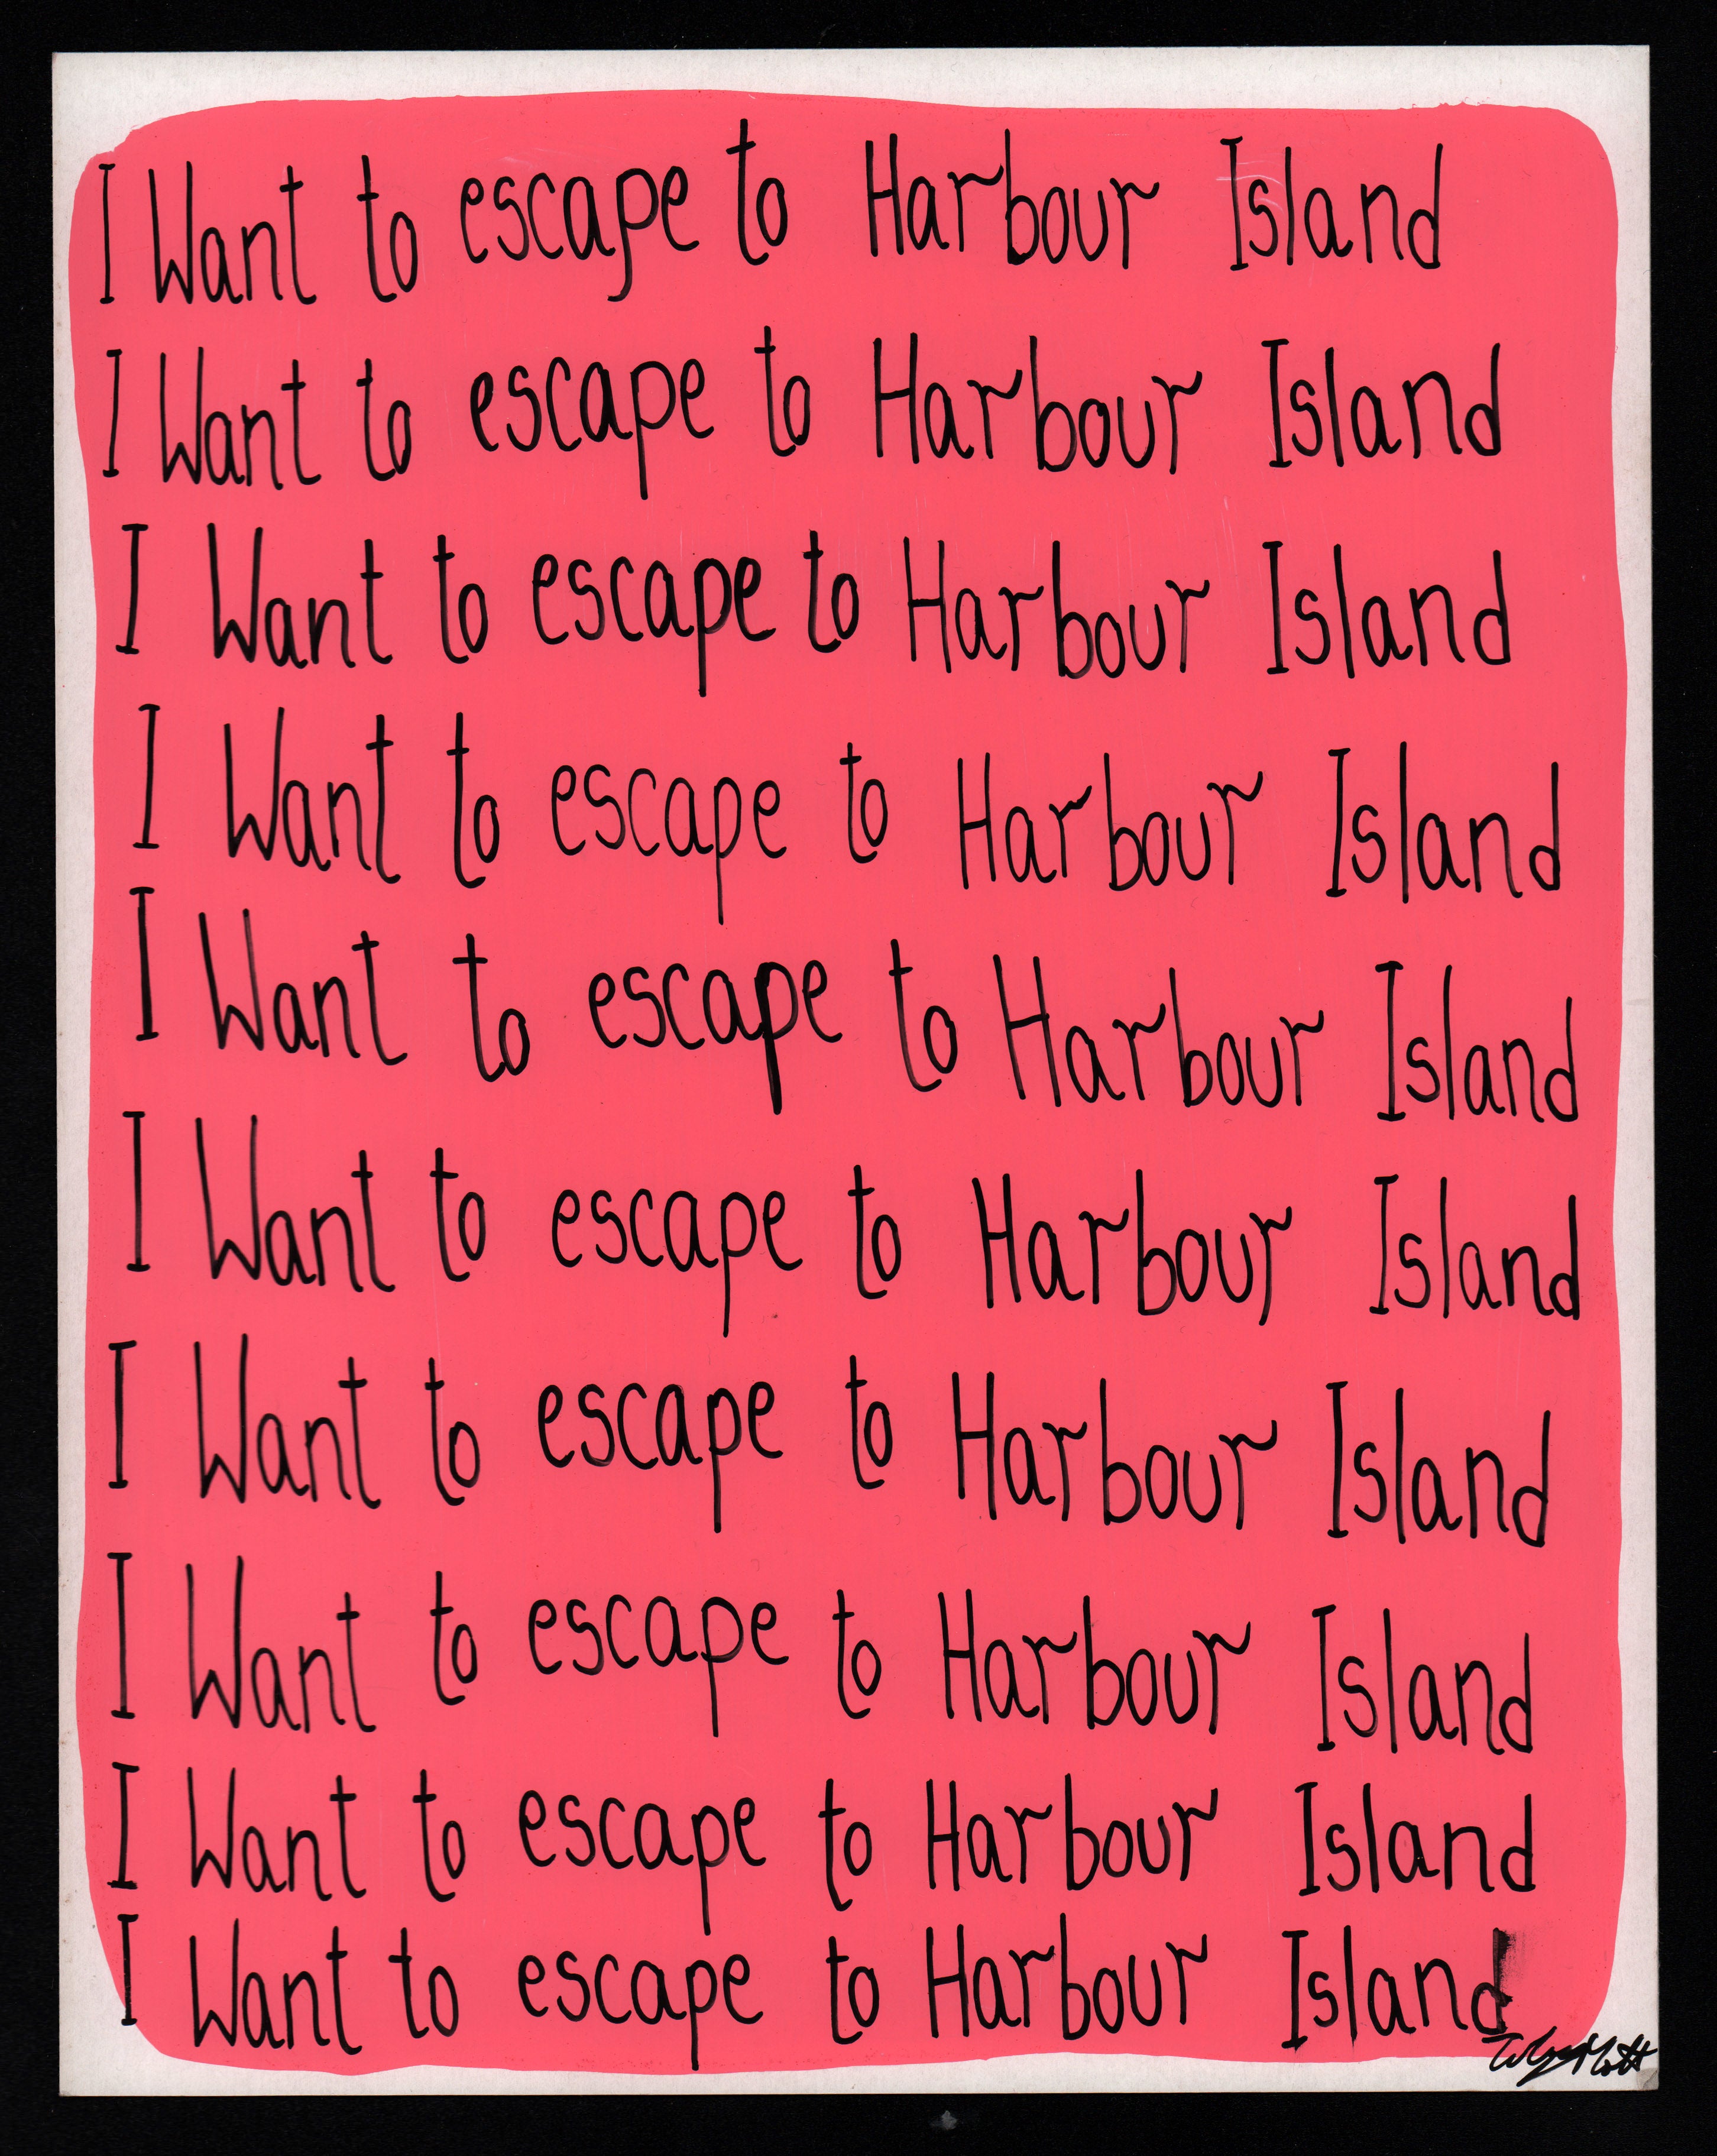 I would like to escape to Harbour Island